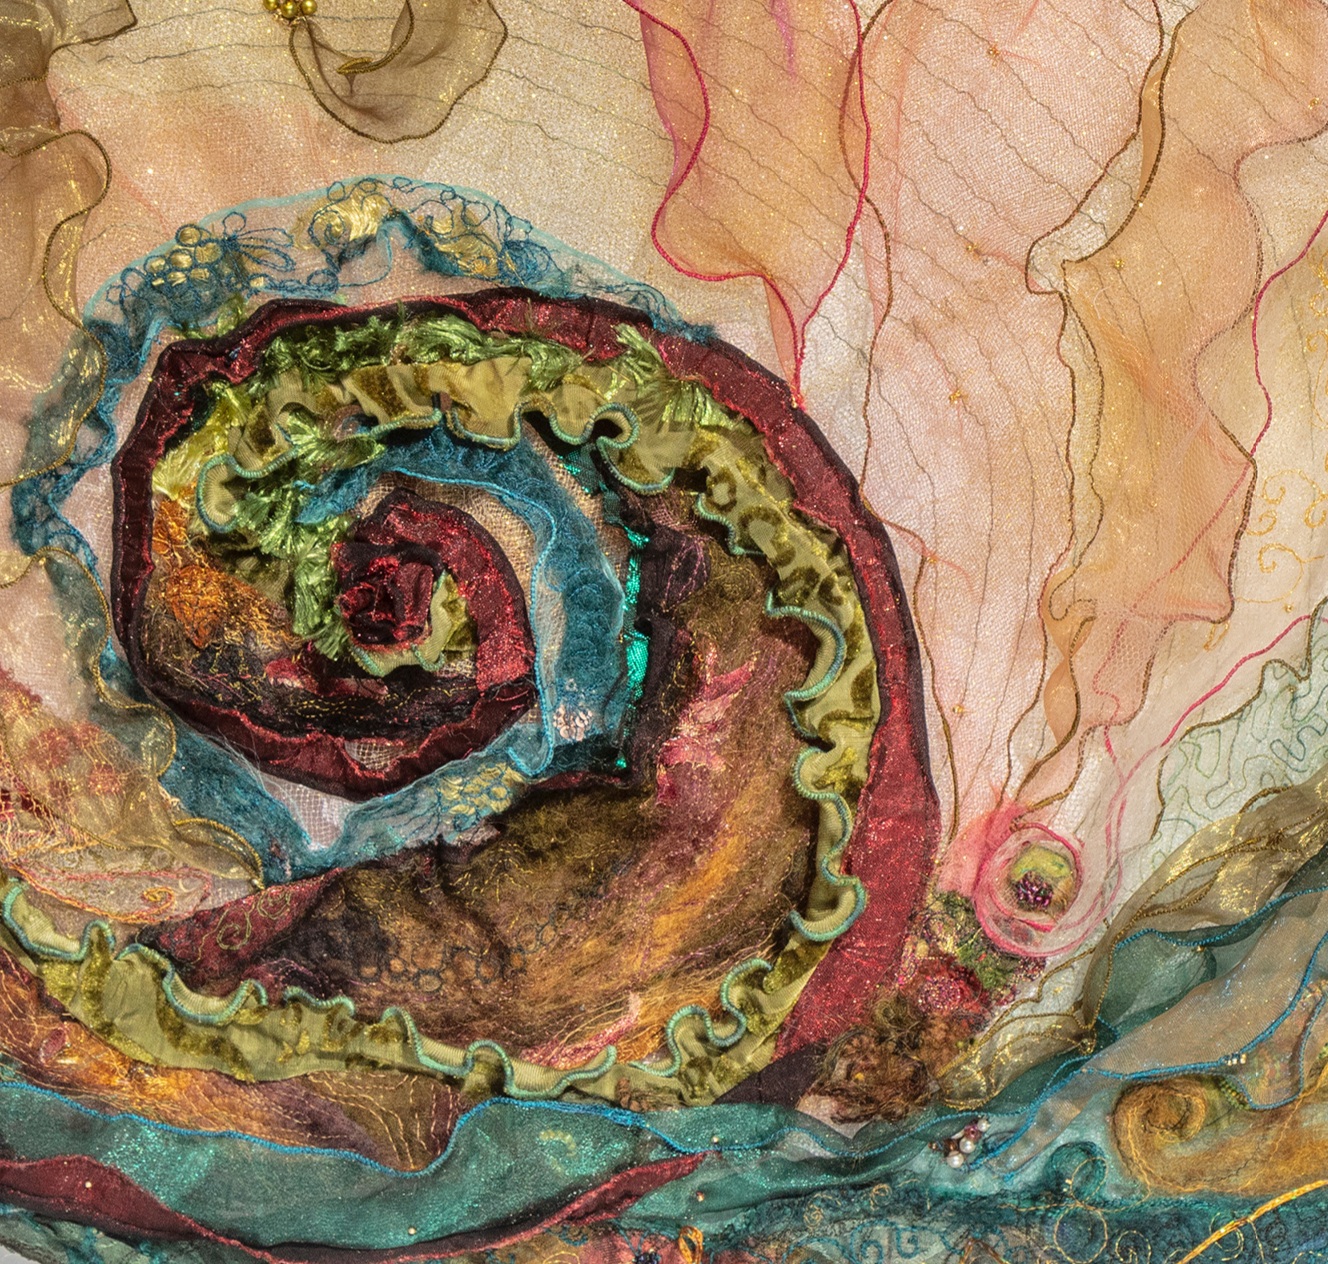 Image shows close up of a textile art abalone by Cindy Thompson for her Artist Profile with Art Trails Tasmania